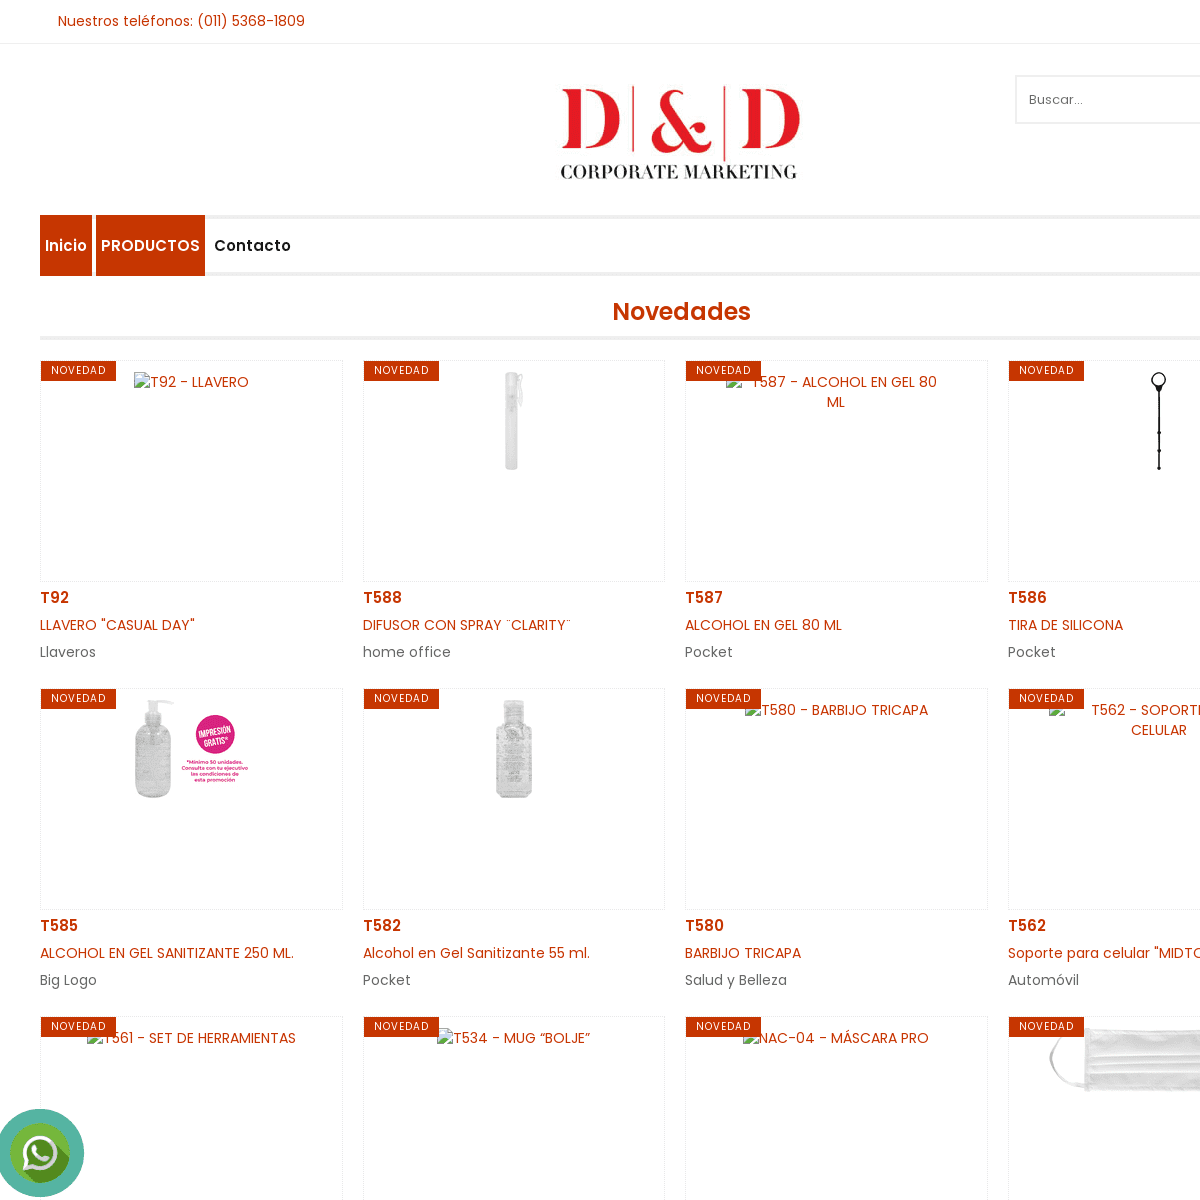 A complete backup of https://dydmerchandising.com.ar